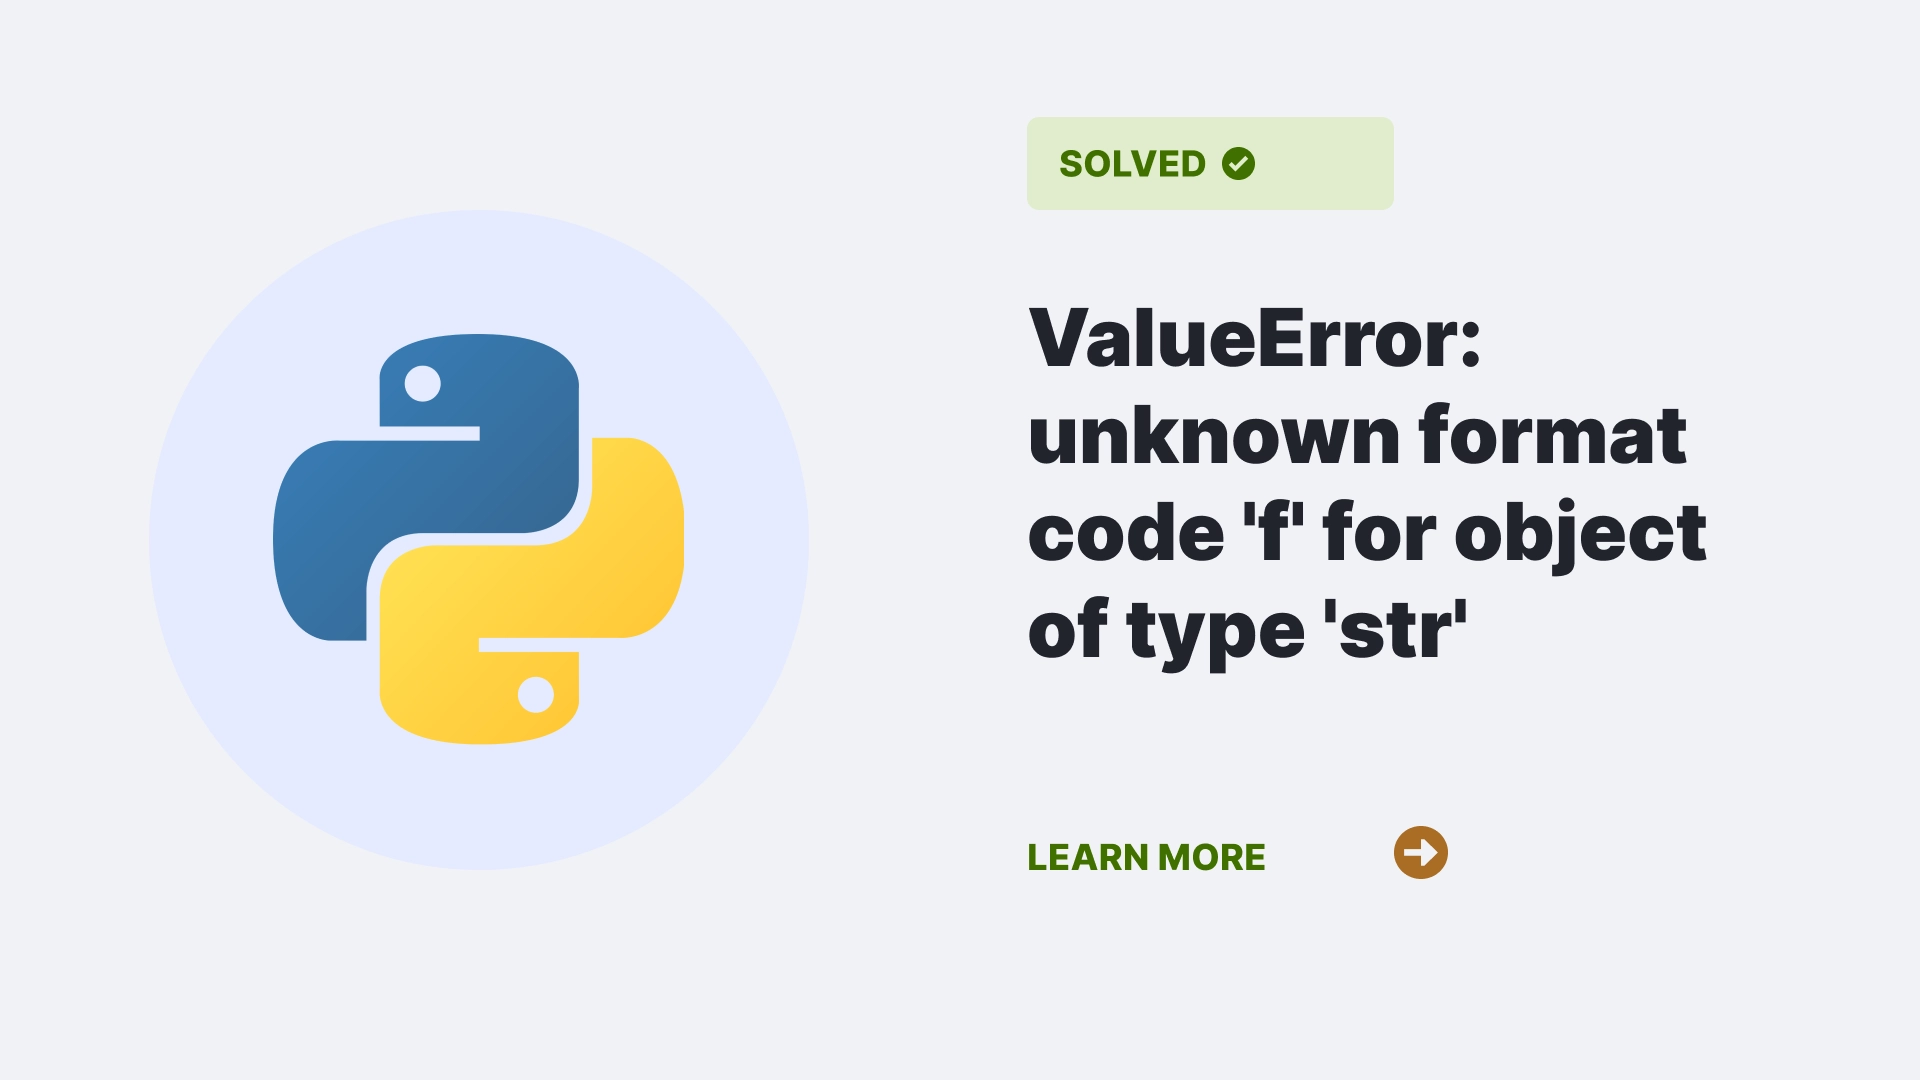 ValueError: unknown format code 'f' for object of type 'str'